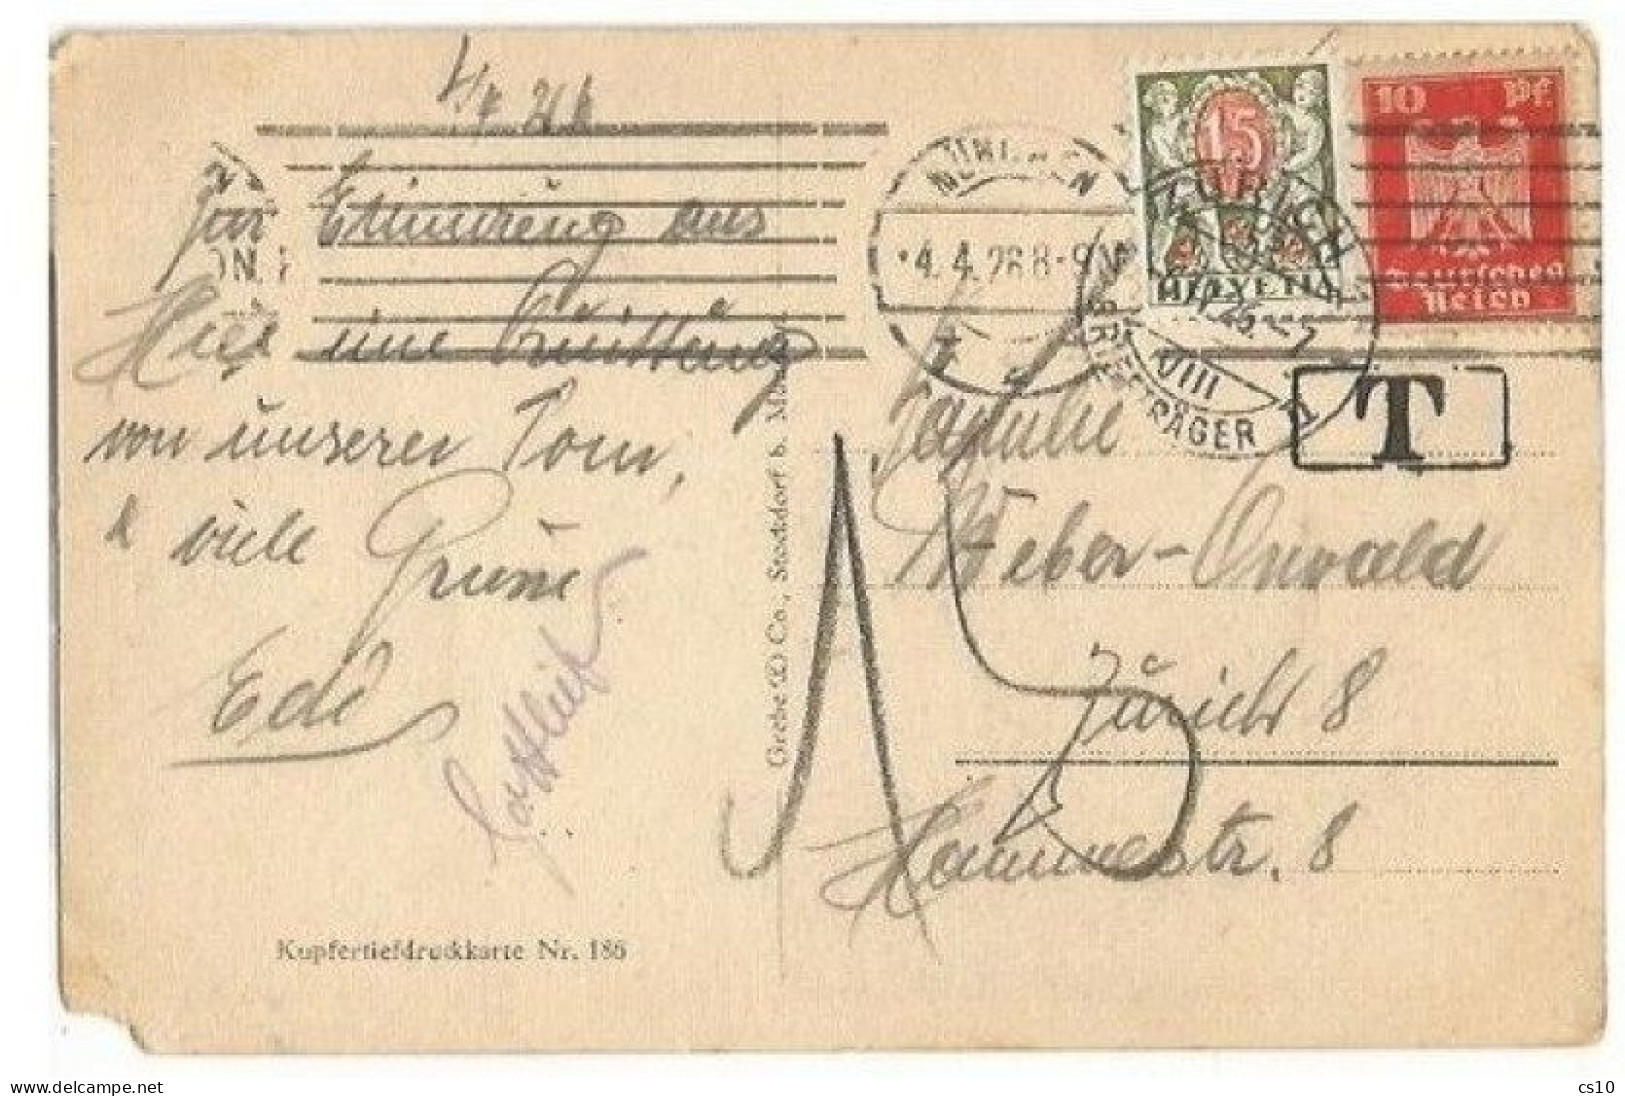 Suisse 6apr1926 Postage Due C.15 Taxing Pcard Munchen 4apr With Eagle Pf10 Solo To Zurich - Taxe